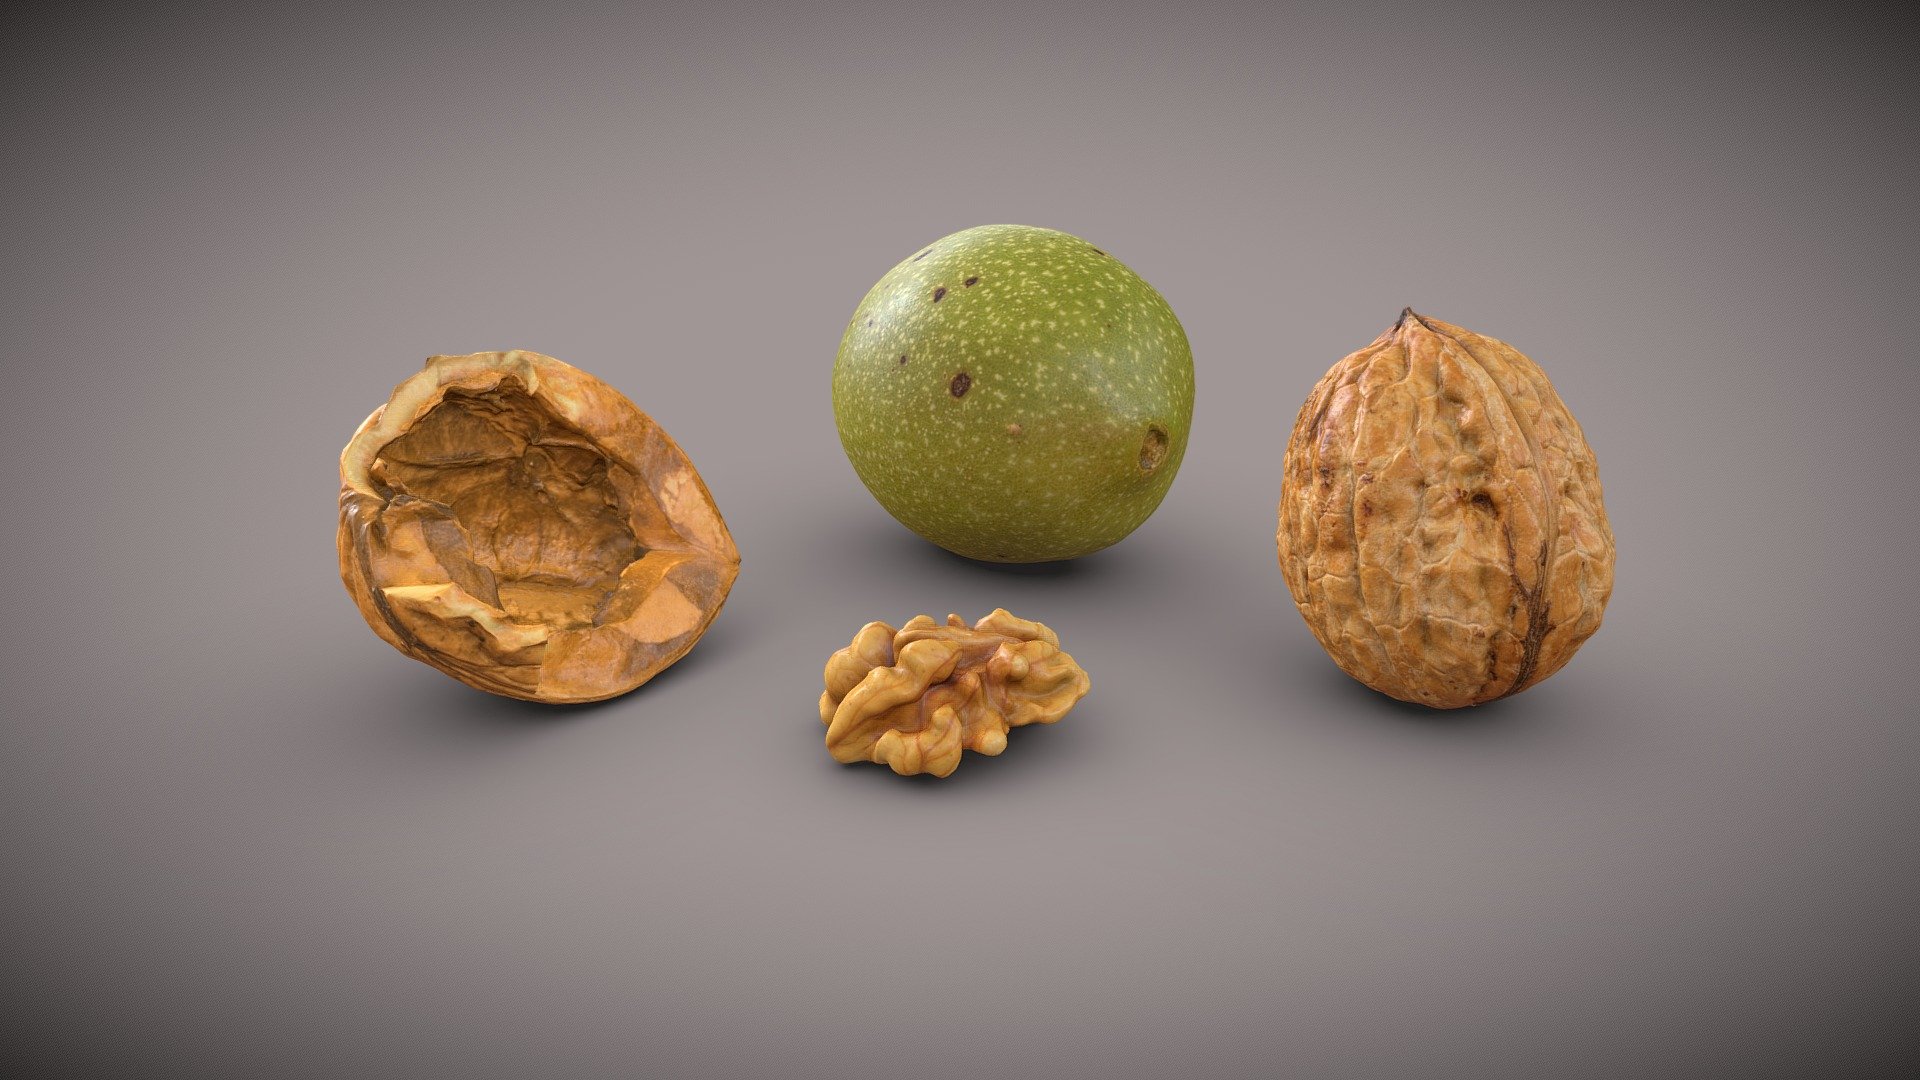 Contains 4 different meshes:




1 Walnut

1 Walnut in growth

1 Walnut kernel

1 Walnut shell (Half)

4 Materials, 2K textures (Diffuse, Roughness, Normal)

Please dowload the additionnal zip file to get access to the separated fbx mesh

Made with Metashape, Blender and Subtance painter

Photos taken with a “Sony A7II + 105mm f/2.8 DG DN Macro Art”



If you have any questions, contact me.

 
 

 - Walnut Pack - Buy Royalty Free 3D model by Zacxophone 3d model